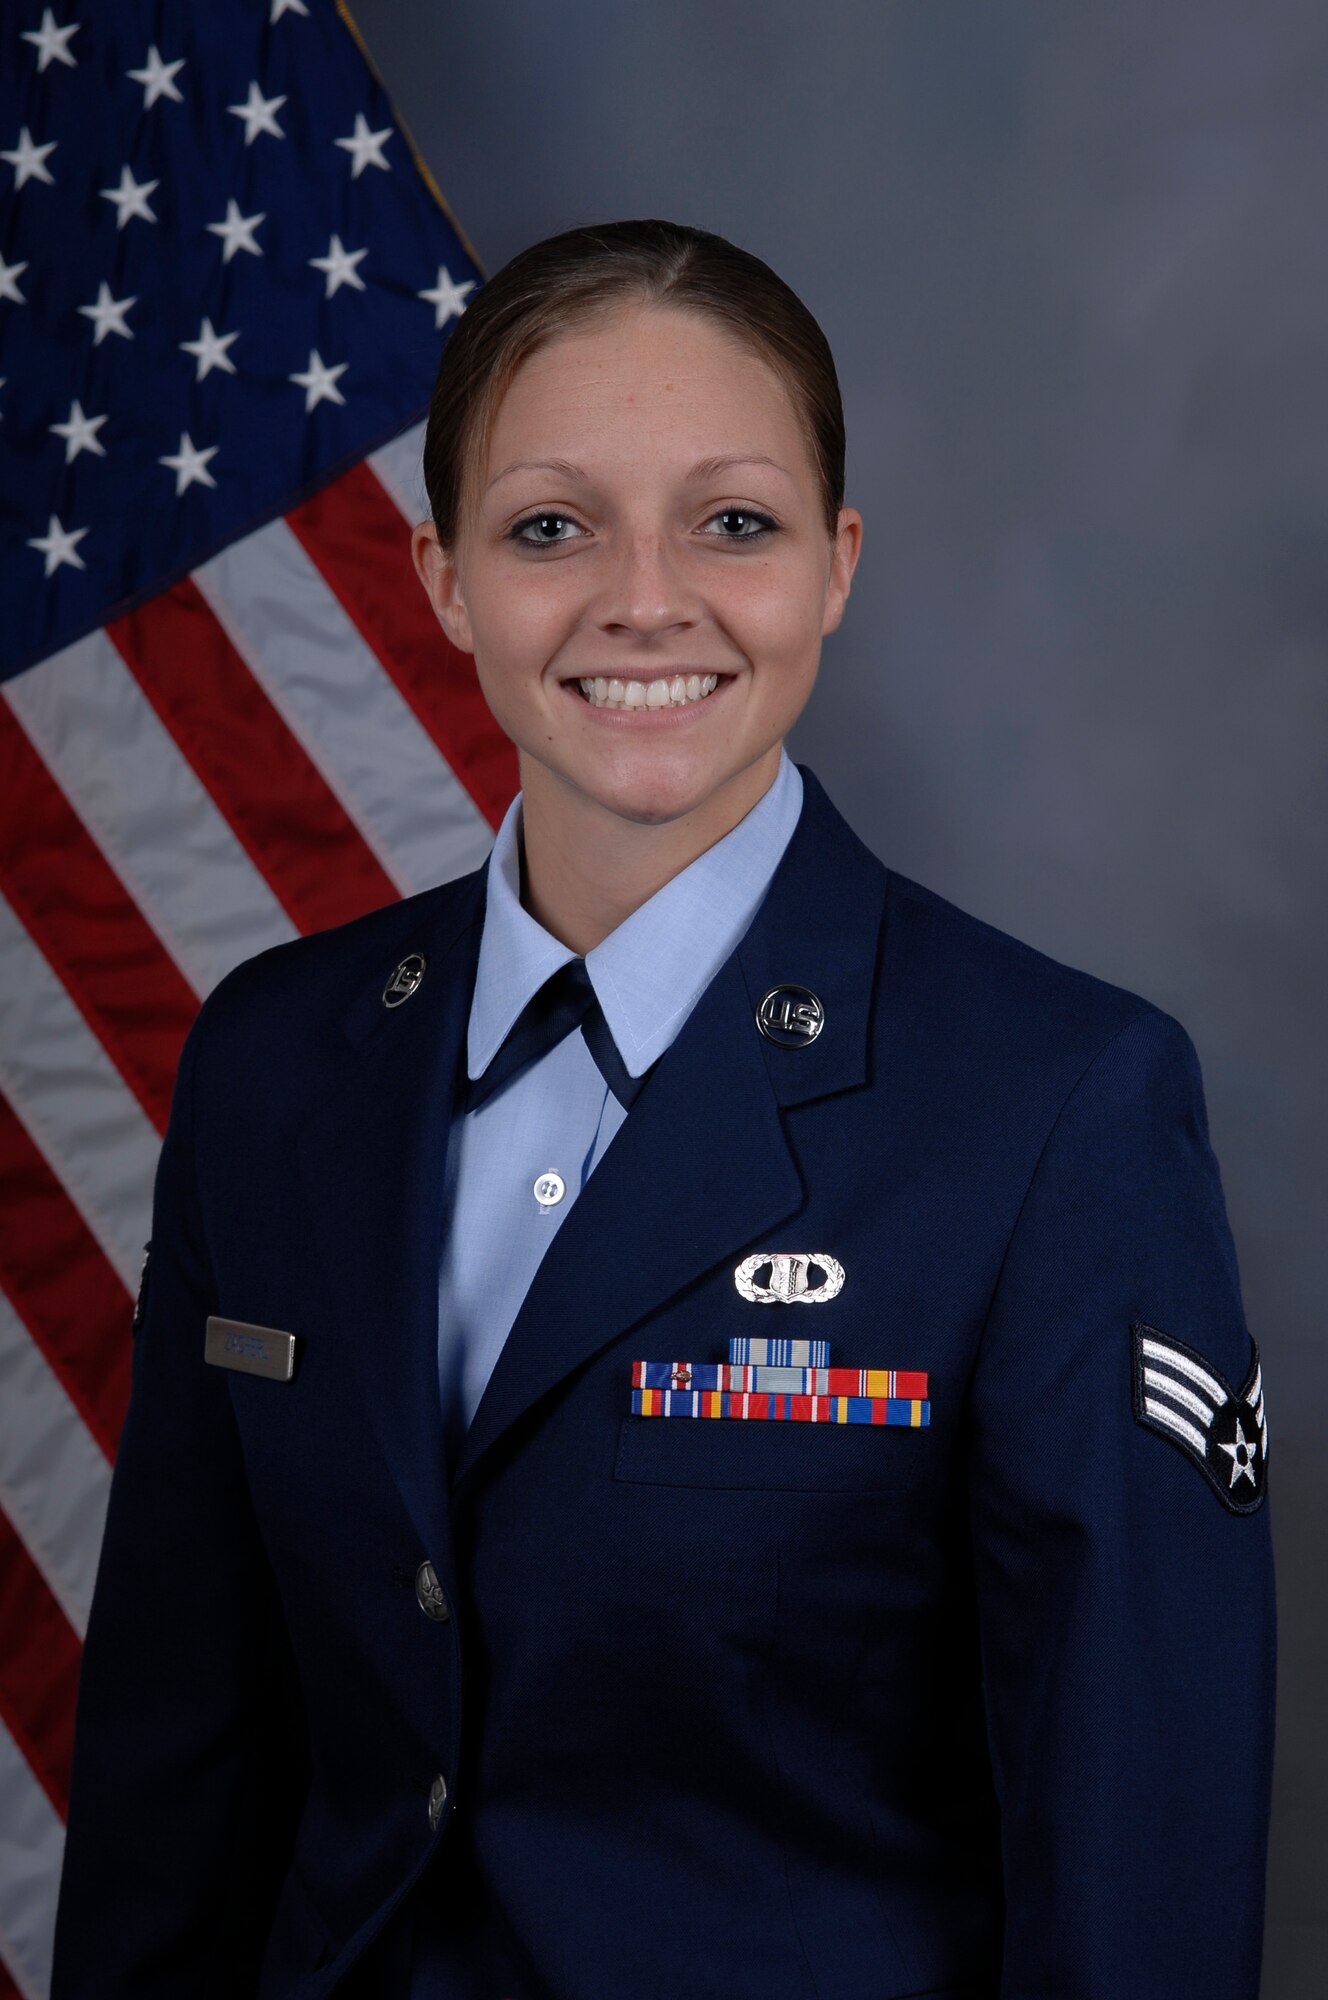 Senior Airman Kristina Zacherl, from 6th Operations Support Squadron at MacDill Air Force Base, Fla., was named the 2010 Air Mobility Command Airman of the Year. According to her biography, Airman Zacherl is a native of Philadelphia and joined the Air Force in 2007. She fulfilled a year commitment as a base honor guard member and obtained her Community College of the Air Force associates degree in air traffic operations and management in June 2010.  Airman Zacherl also won her squadron’s Airman of the quarter award four times and was selected as the 6th Operations Group Airman of the Year, the biography shows.  She attended Airman Leadership School in November 2010 and received the John Levitow Award -- the top award -- for her scholastic success and leadership values.  She is the recipient of the Air Force Achievement Medal and is recognized by her co-workers and leaders for “her hard work and dedication.” (U.S. Air Force Photo)

